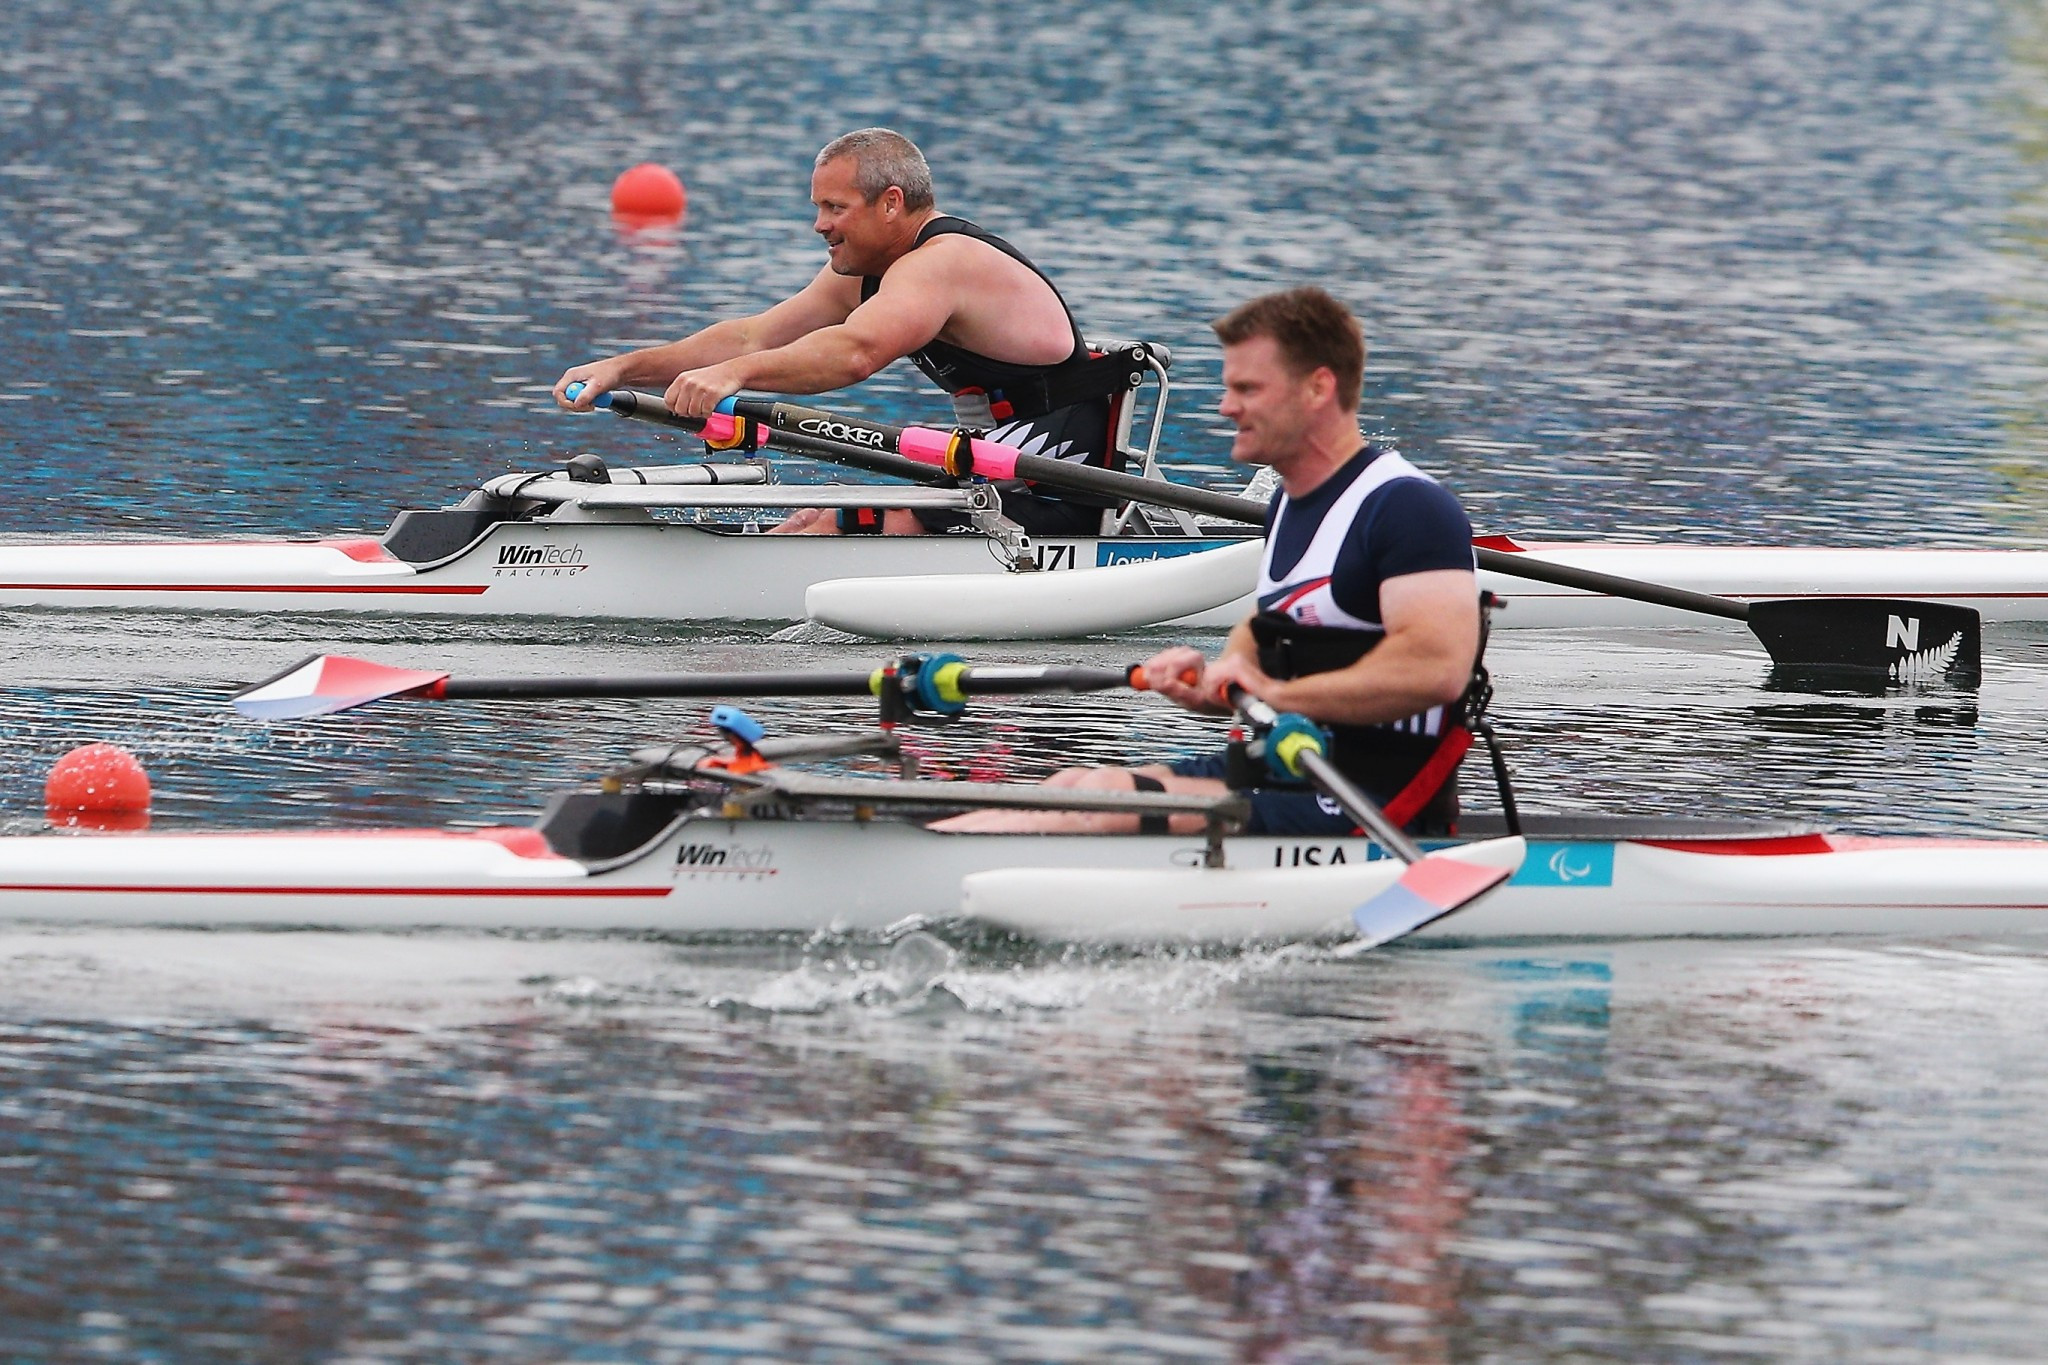 The International Rowing Federation received funding in 2014 for a Para-rowing development training camp and regatta